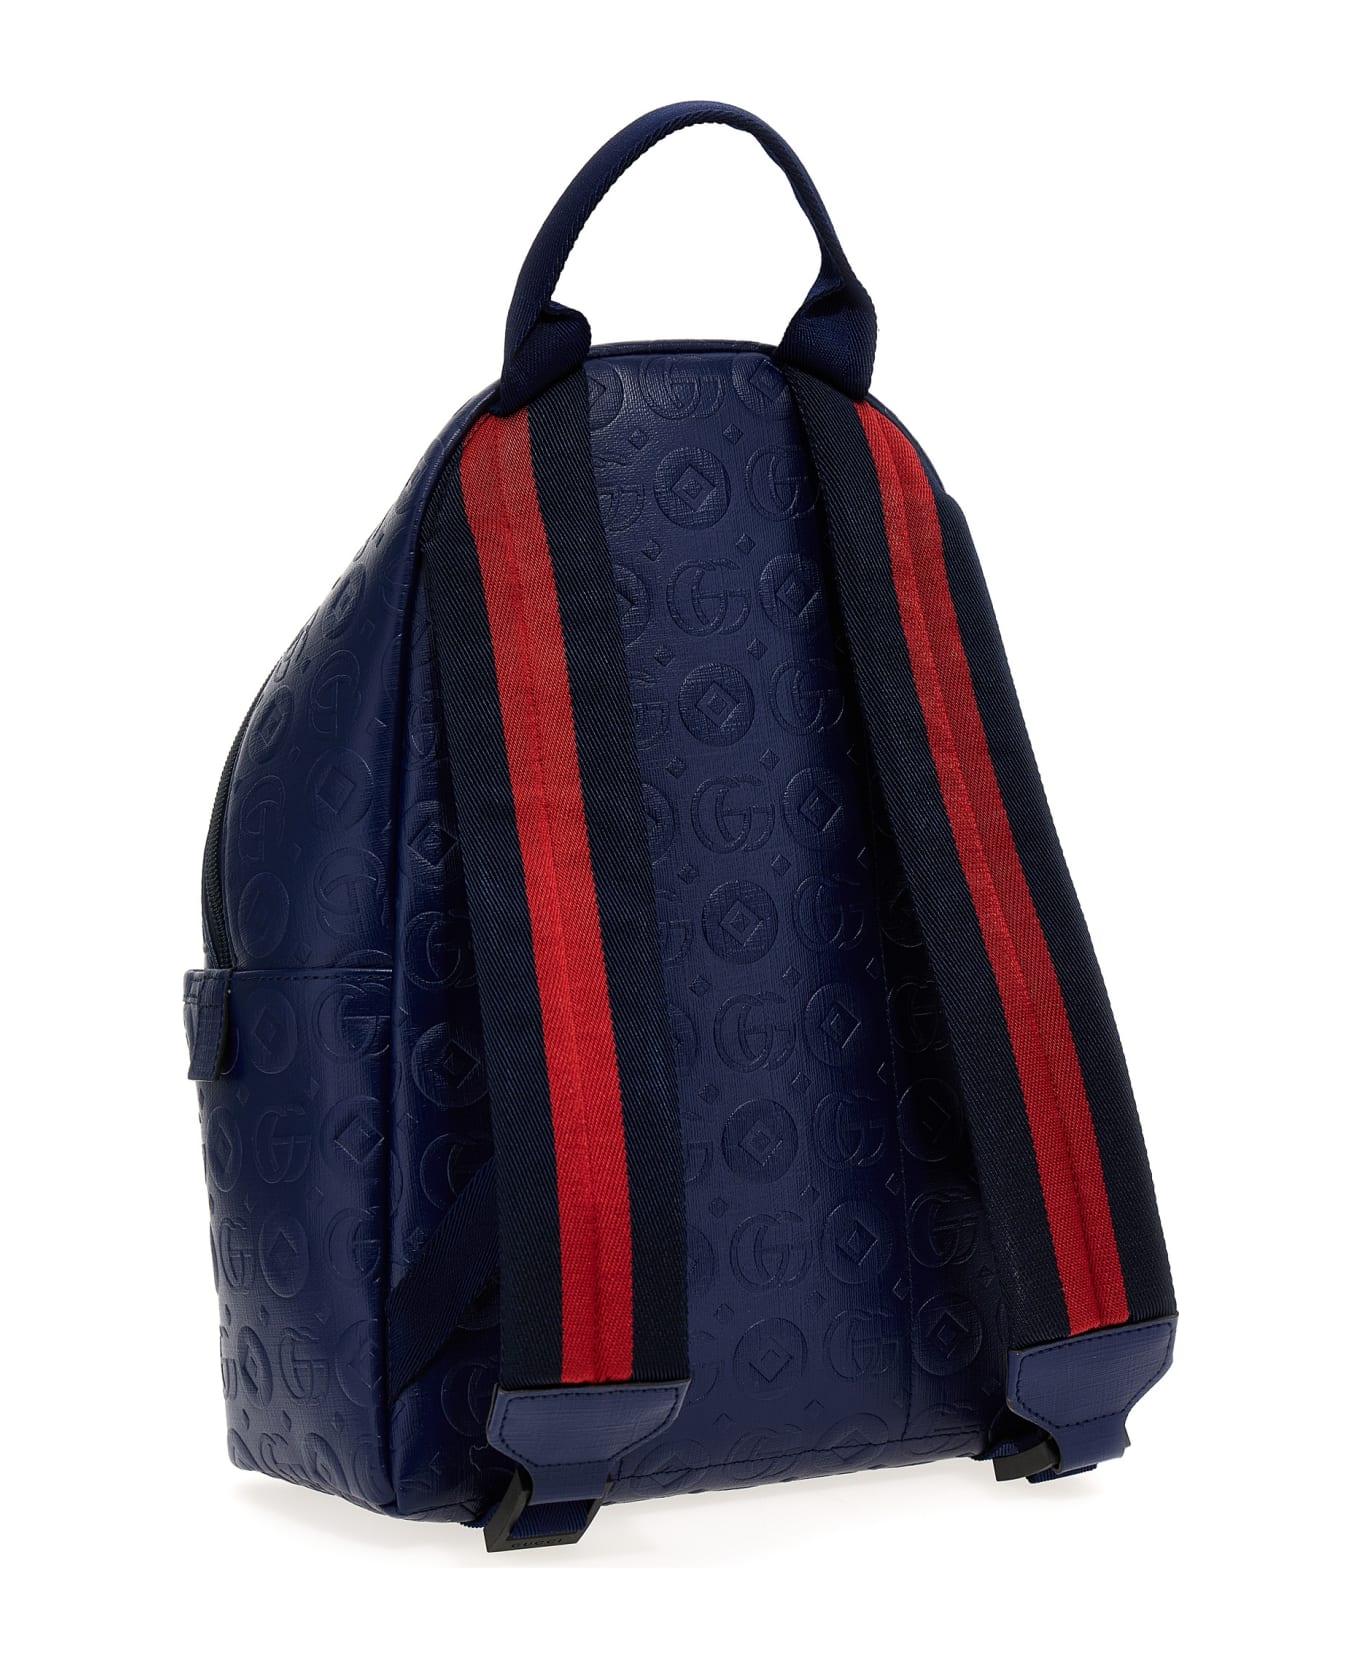 Gucci 'double G' Backpack